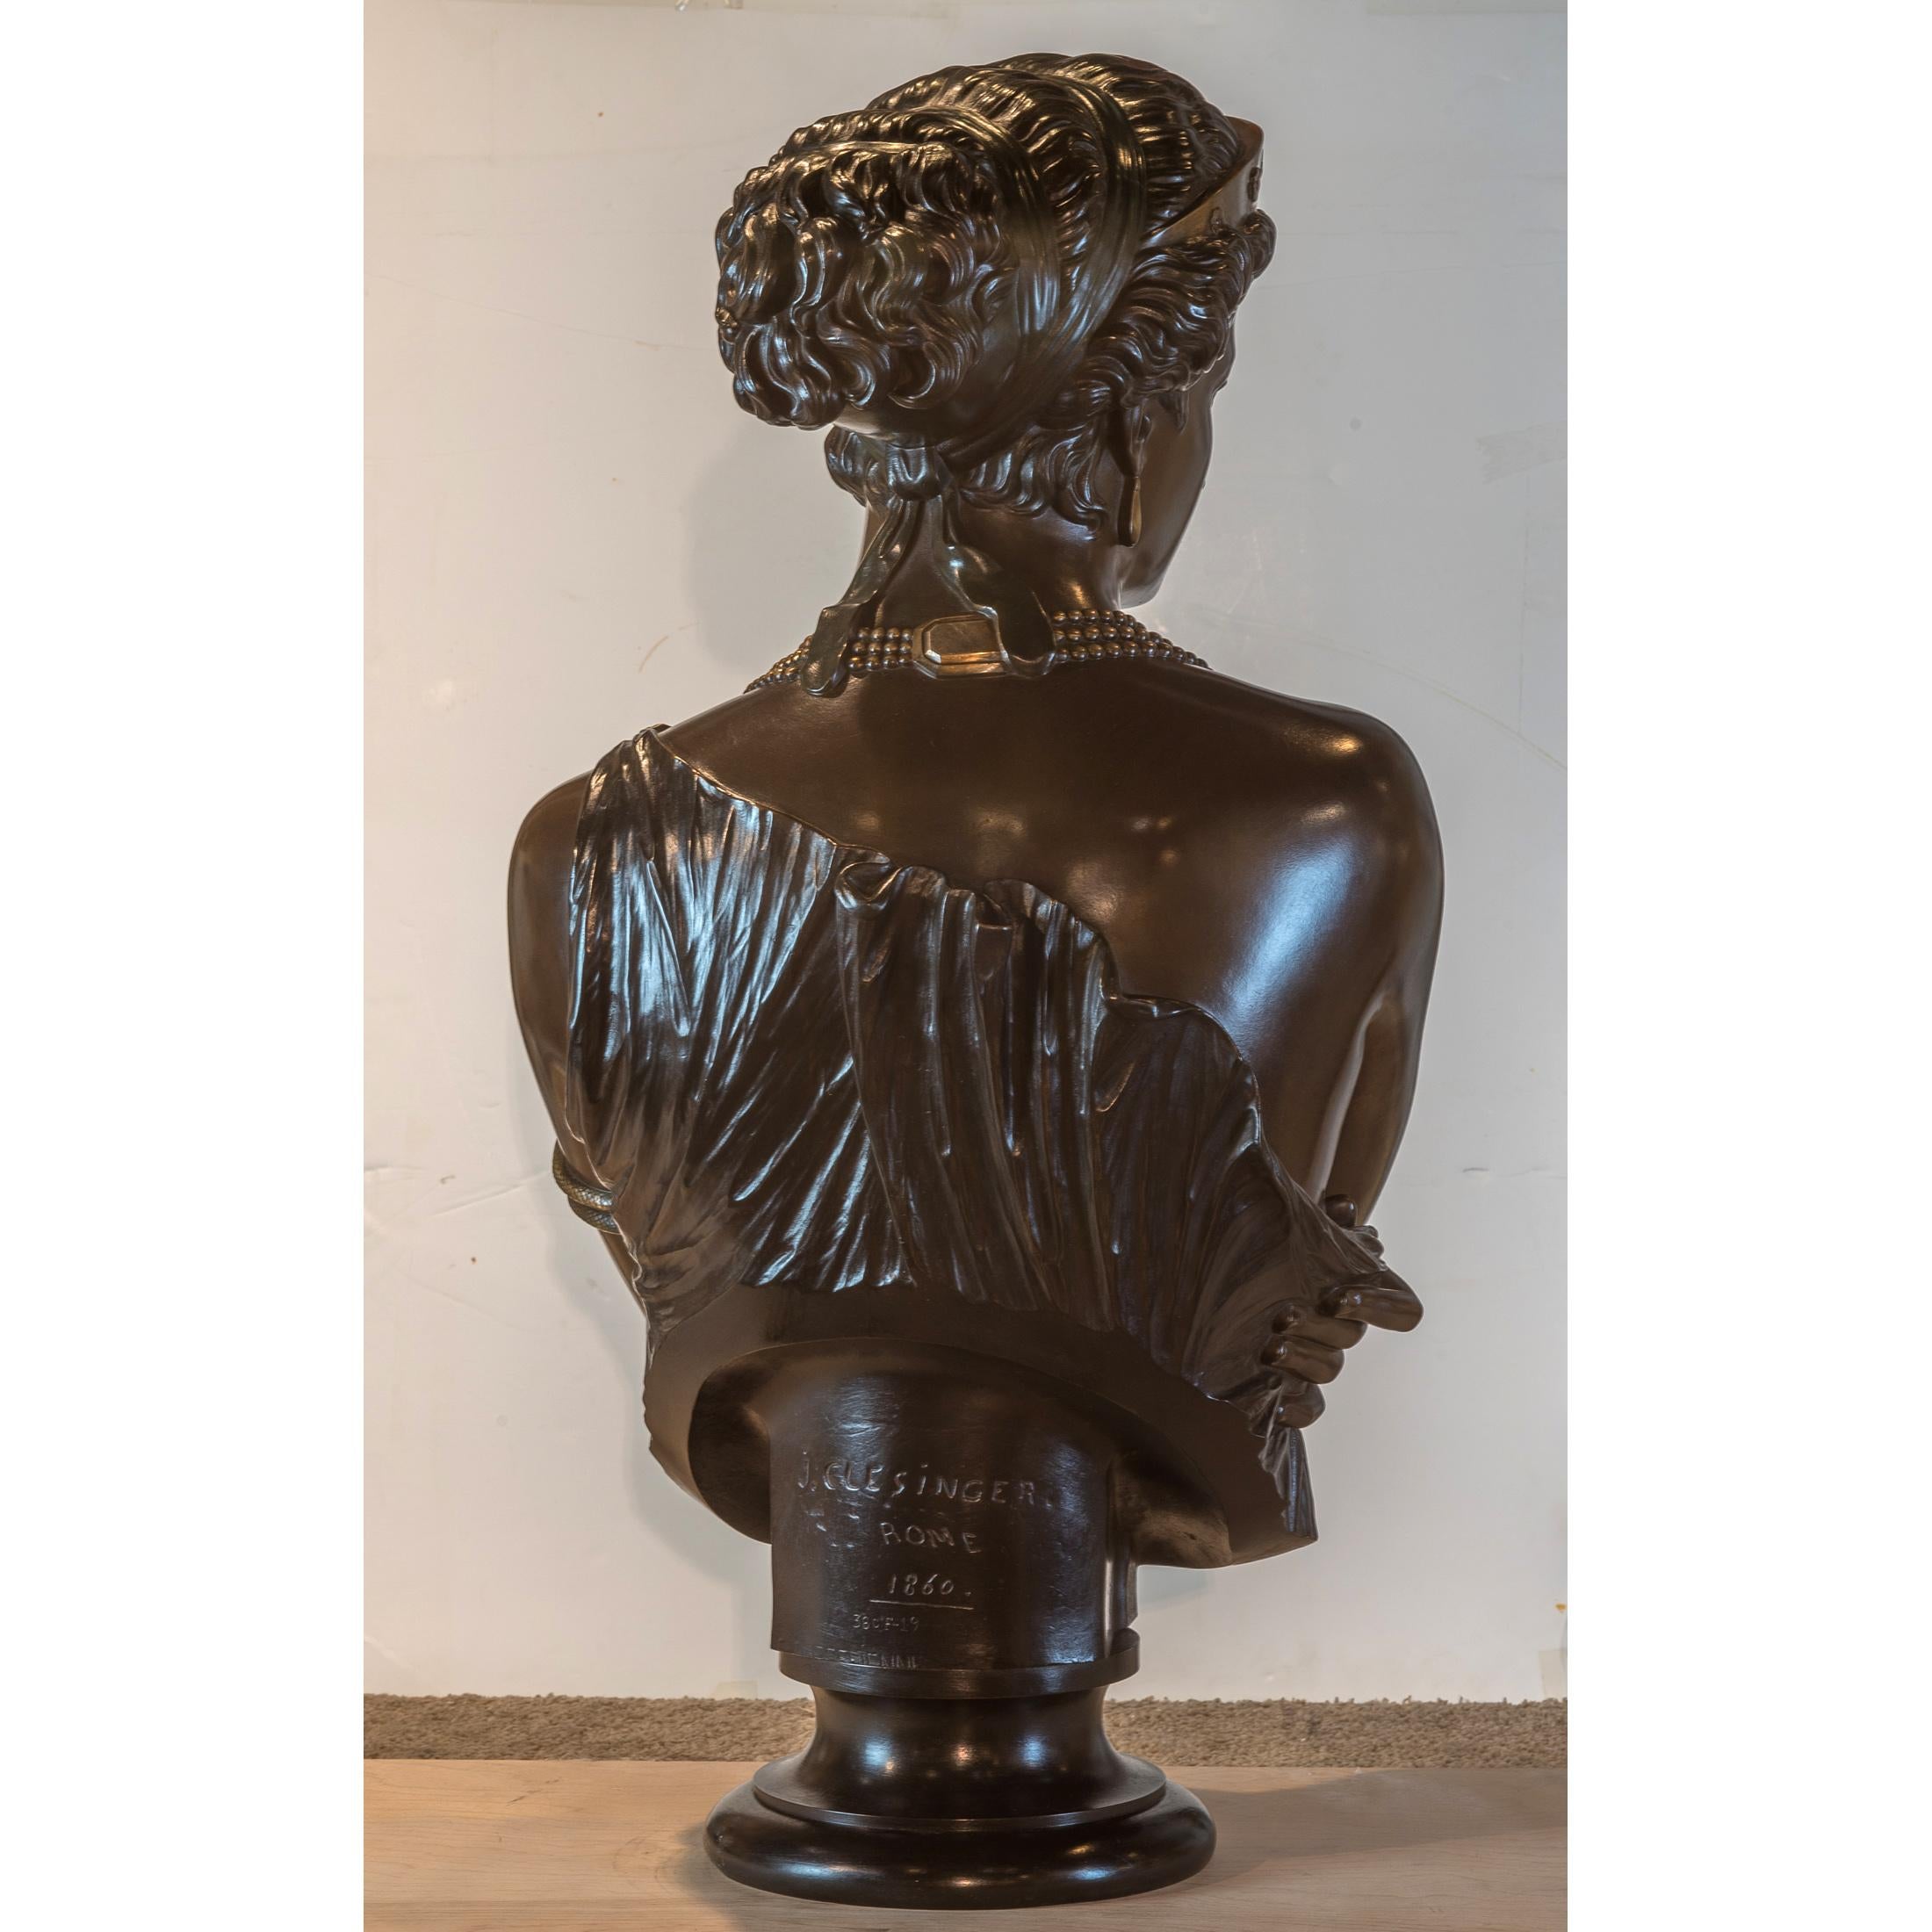 JEAN-BAPTISTE CLÉSINGER  
French, (1814-1883)

Helen of Troy

Signed 'J. CLESINGER / ROME / 1860.' and with foundry inscription 'F. BARBEDIENNE. FONDEUR'
30 3/4 in. x 17 in.